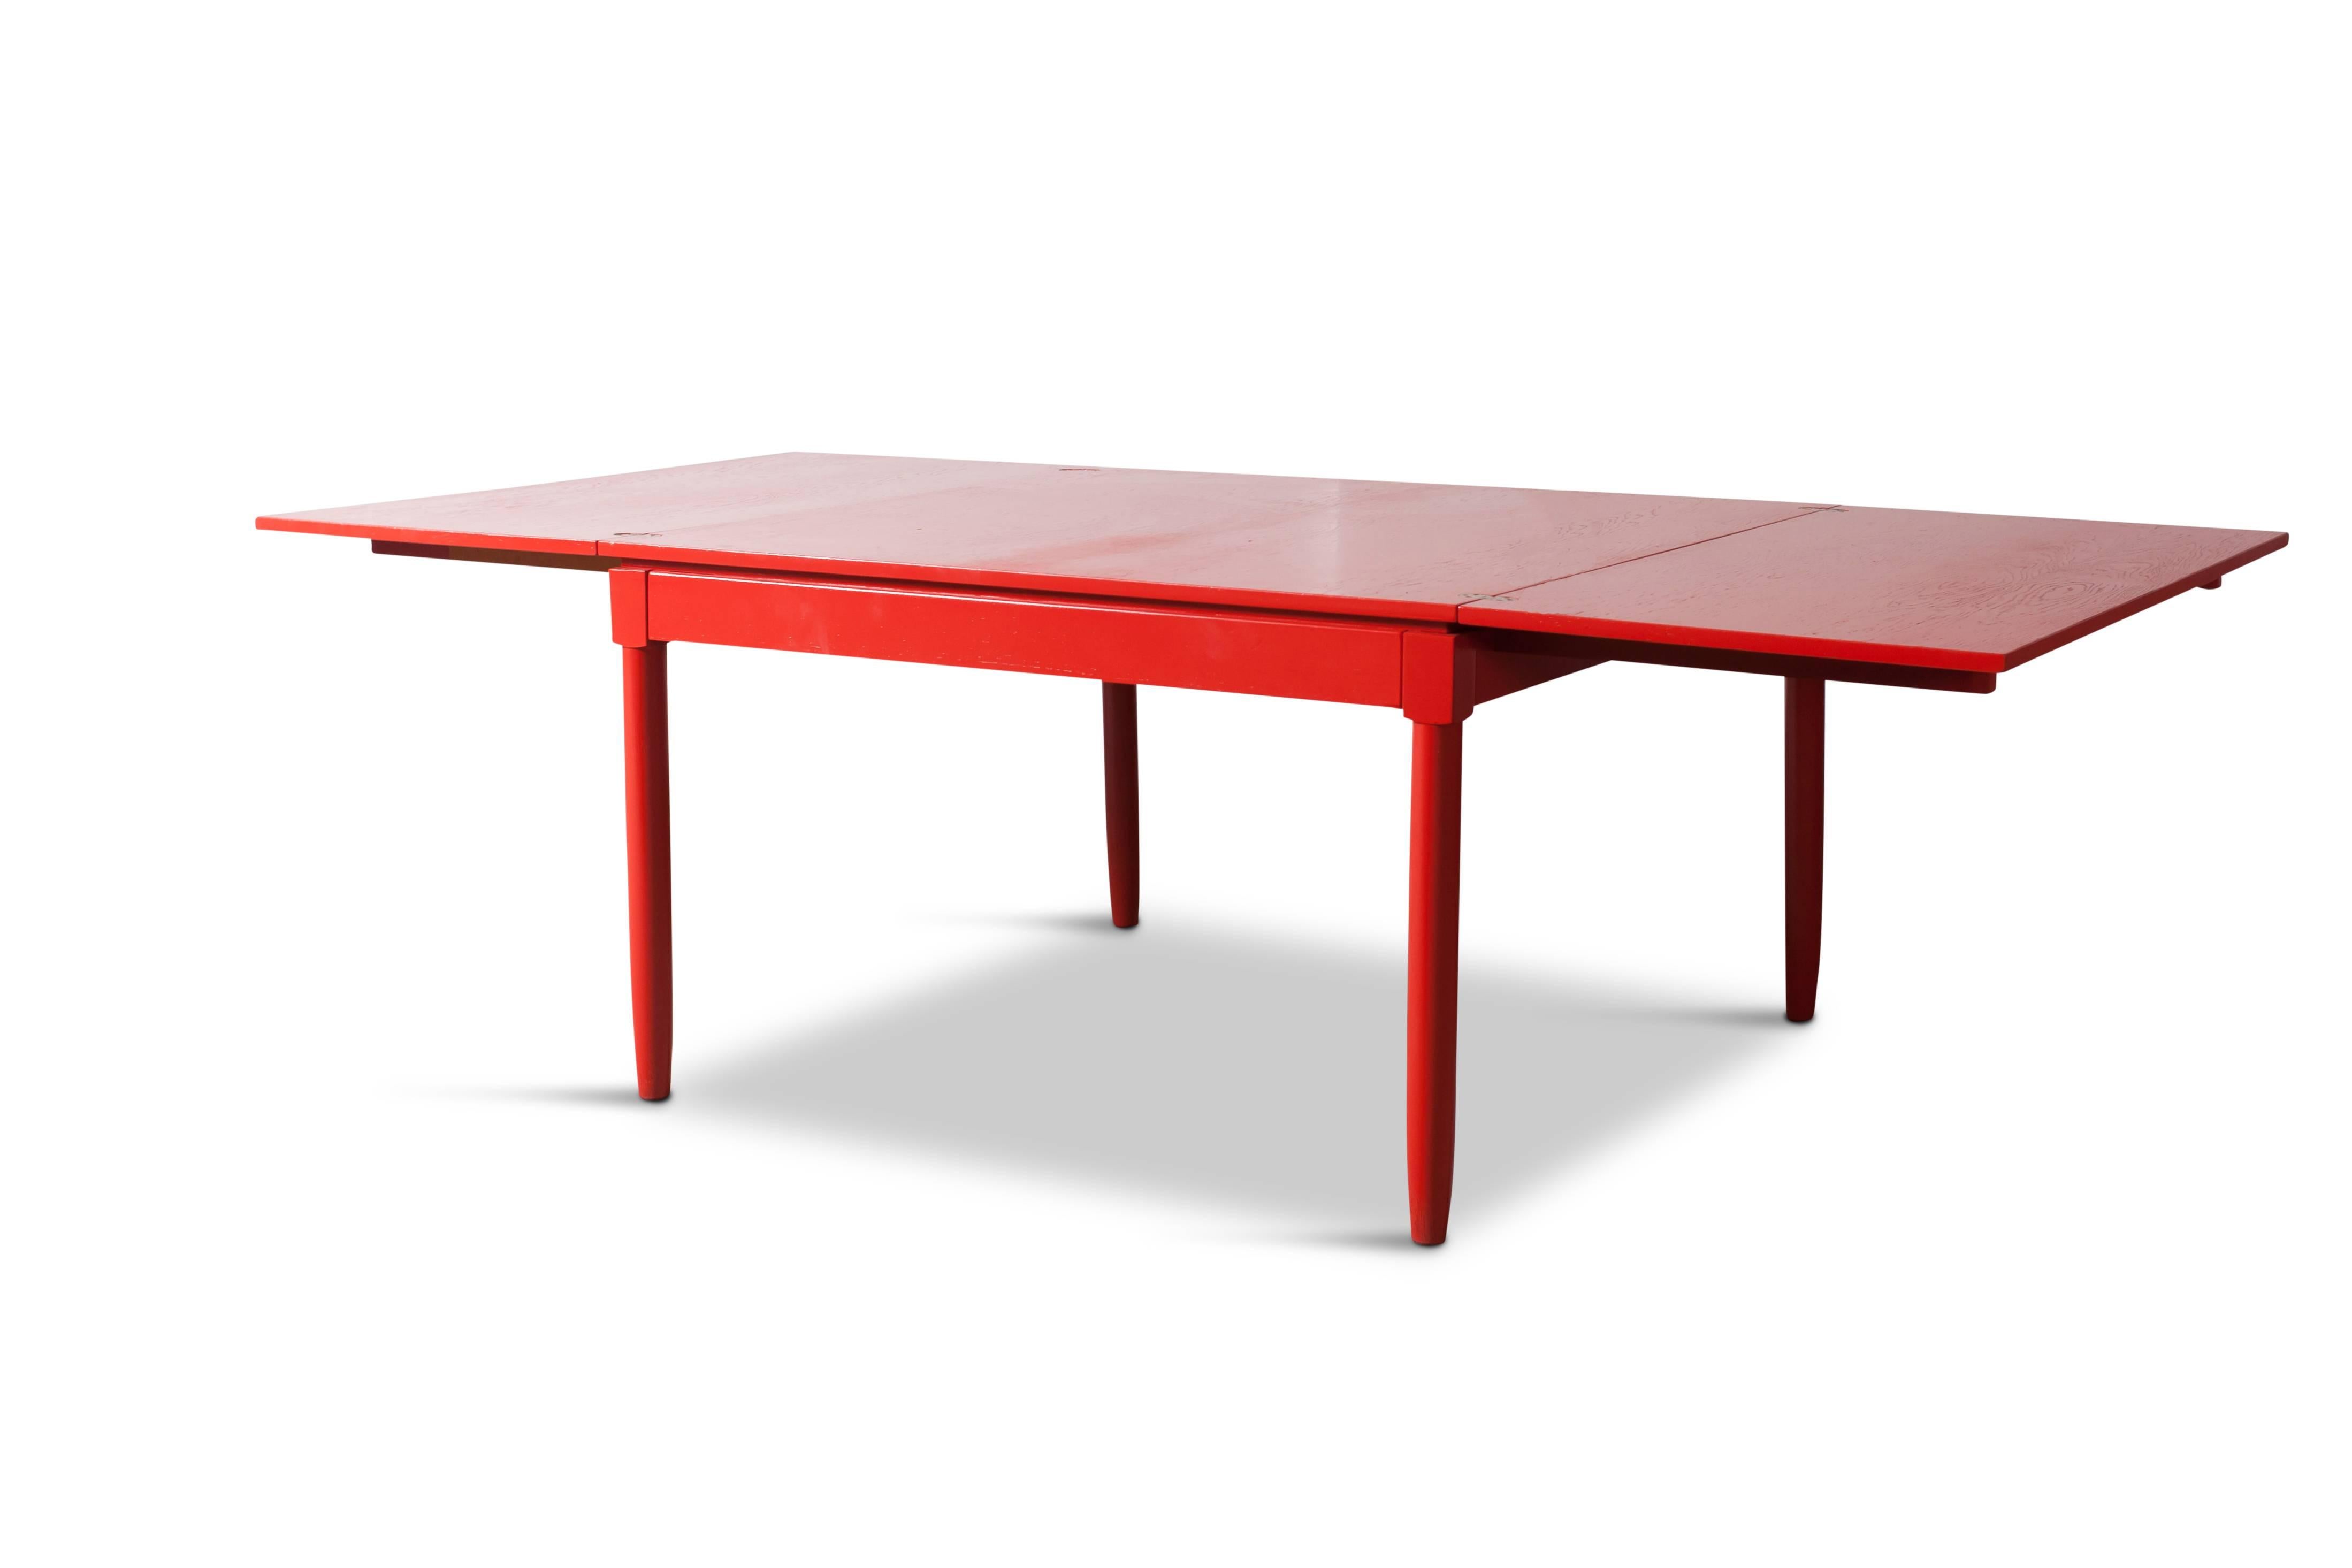 Red Lacquered extendable Dining table
by Vico Magistretti for Cassina

A true iconic design with a simple and elegant shape 

Red lacquered wood and decorative brass hinges 

We have a matching set of dining chairs available

Italy, 1960's

W 244,5